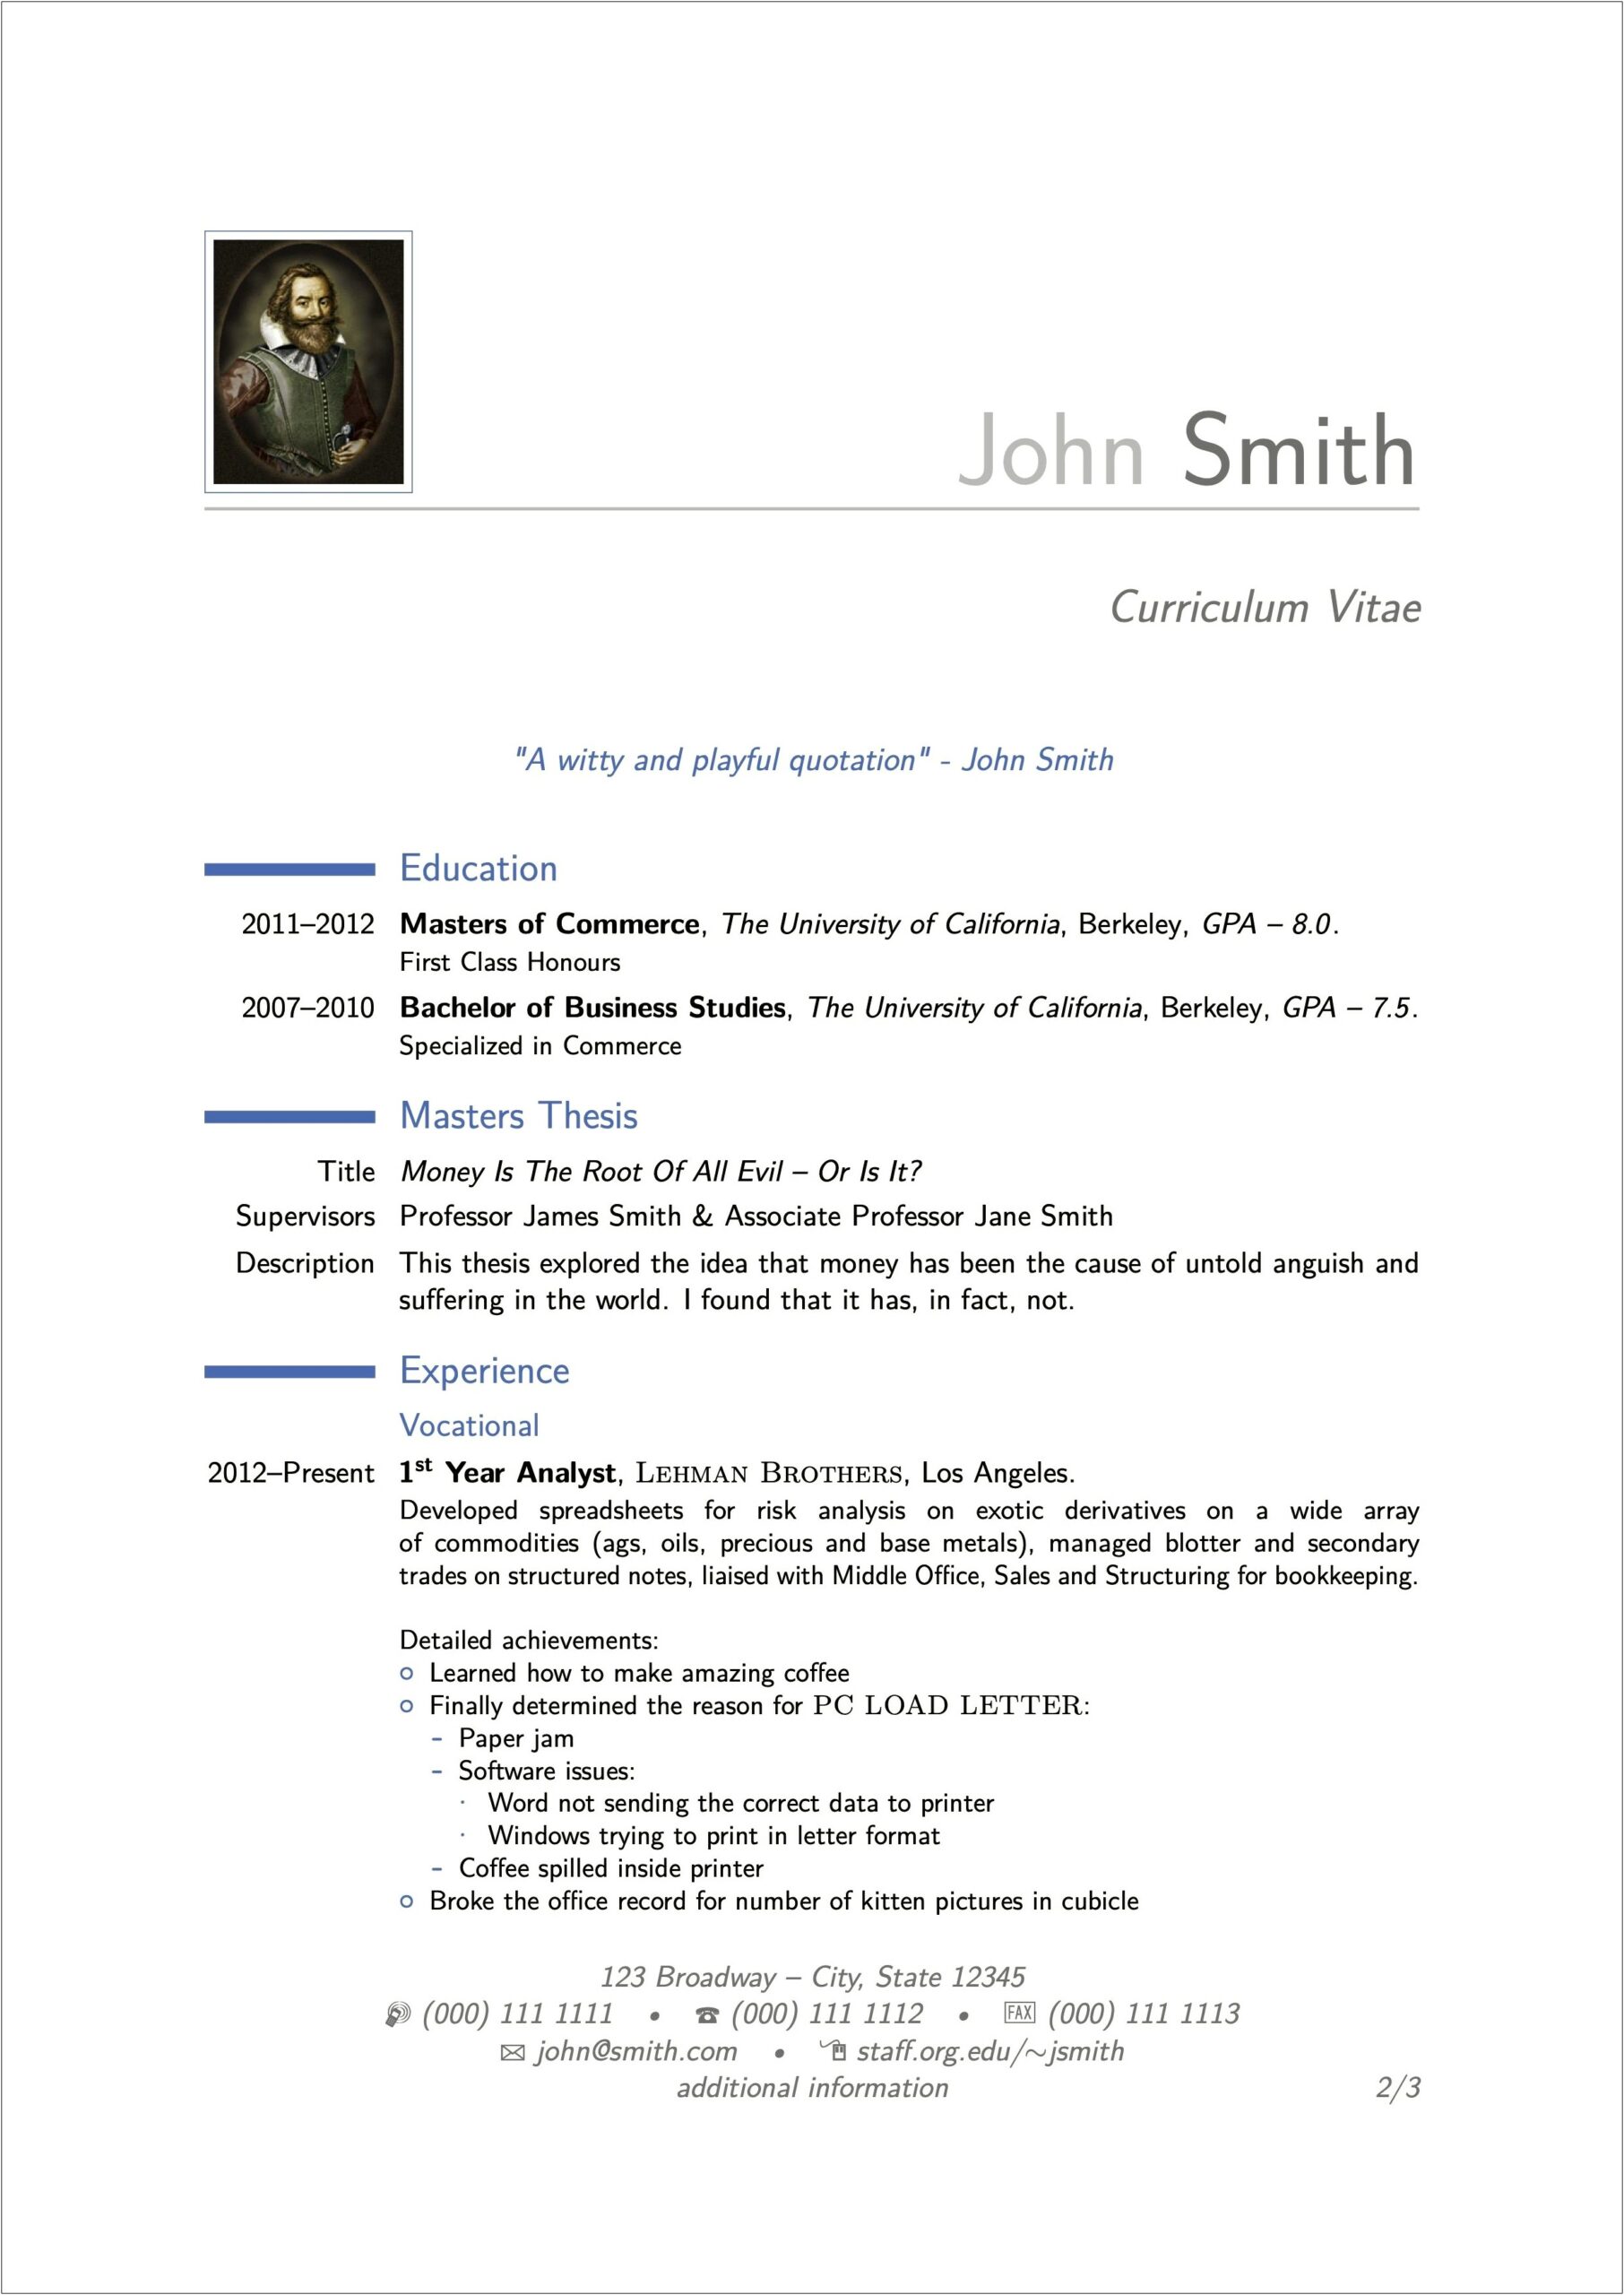 Microsoft Word Resume Template With Right Line